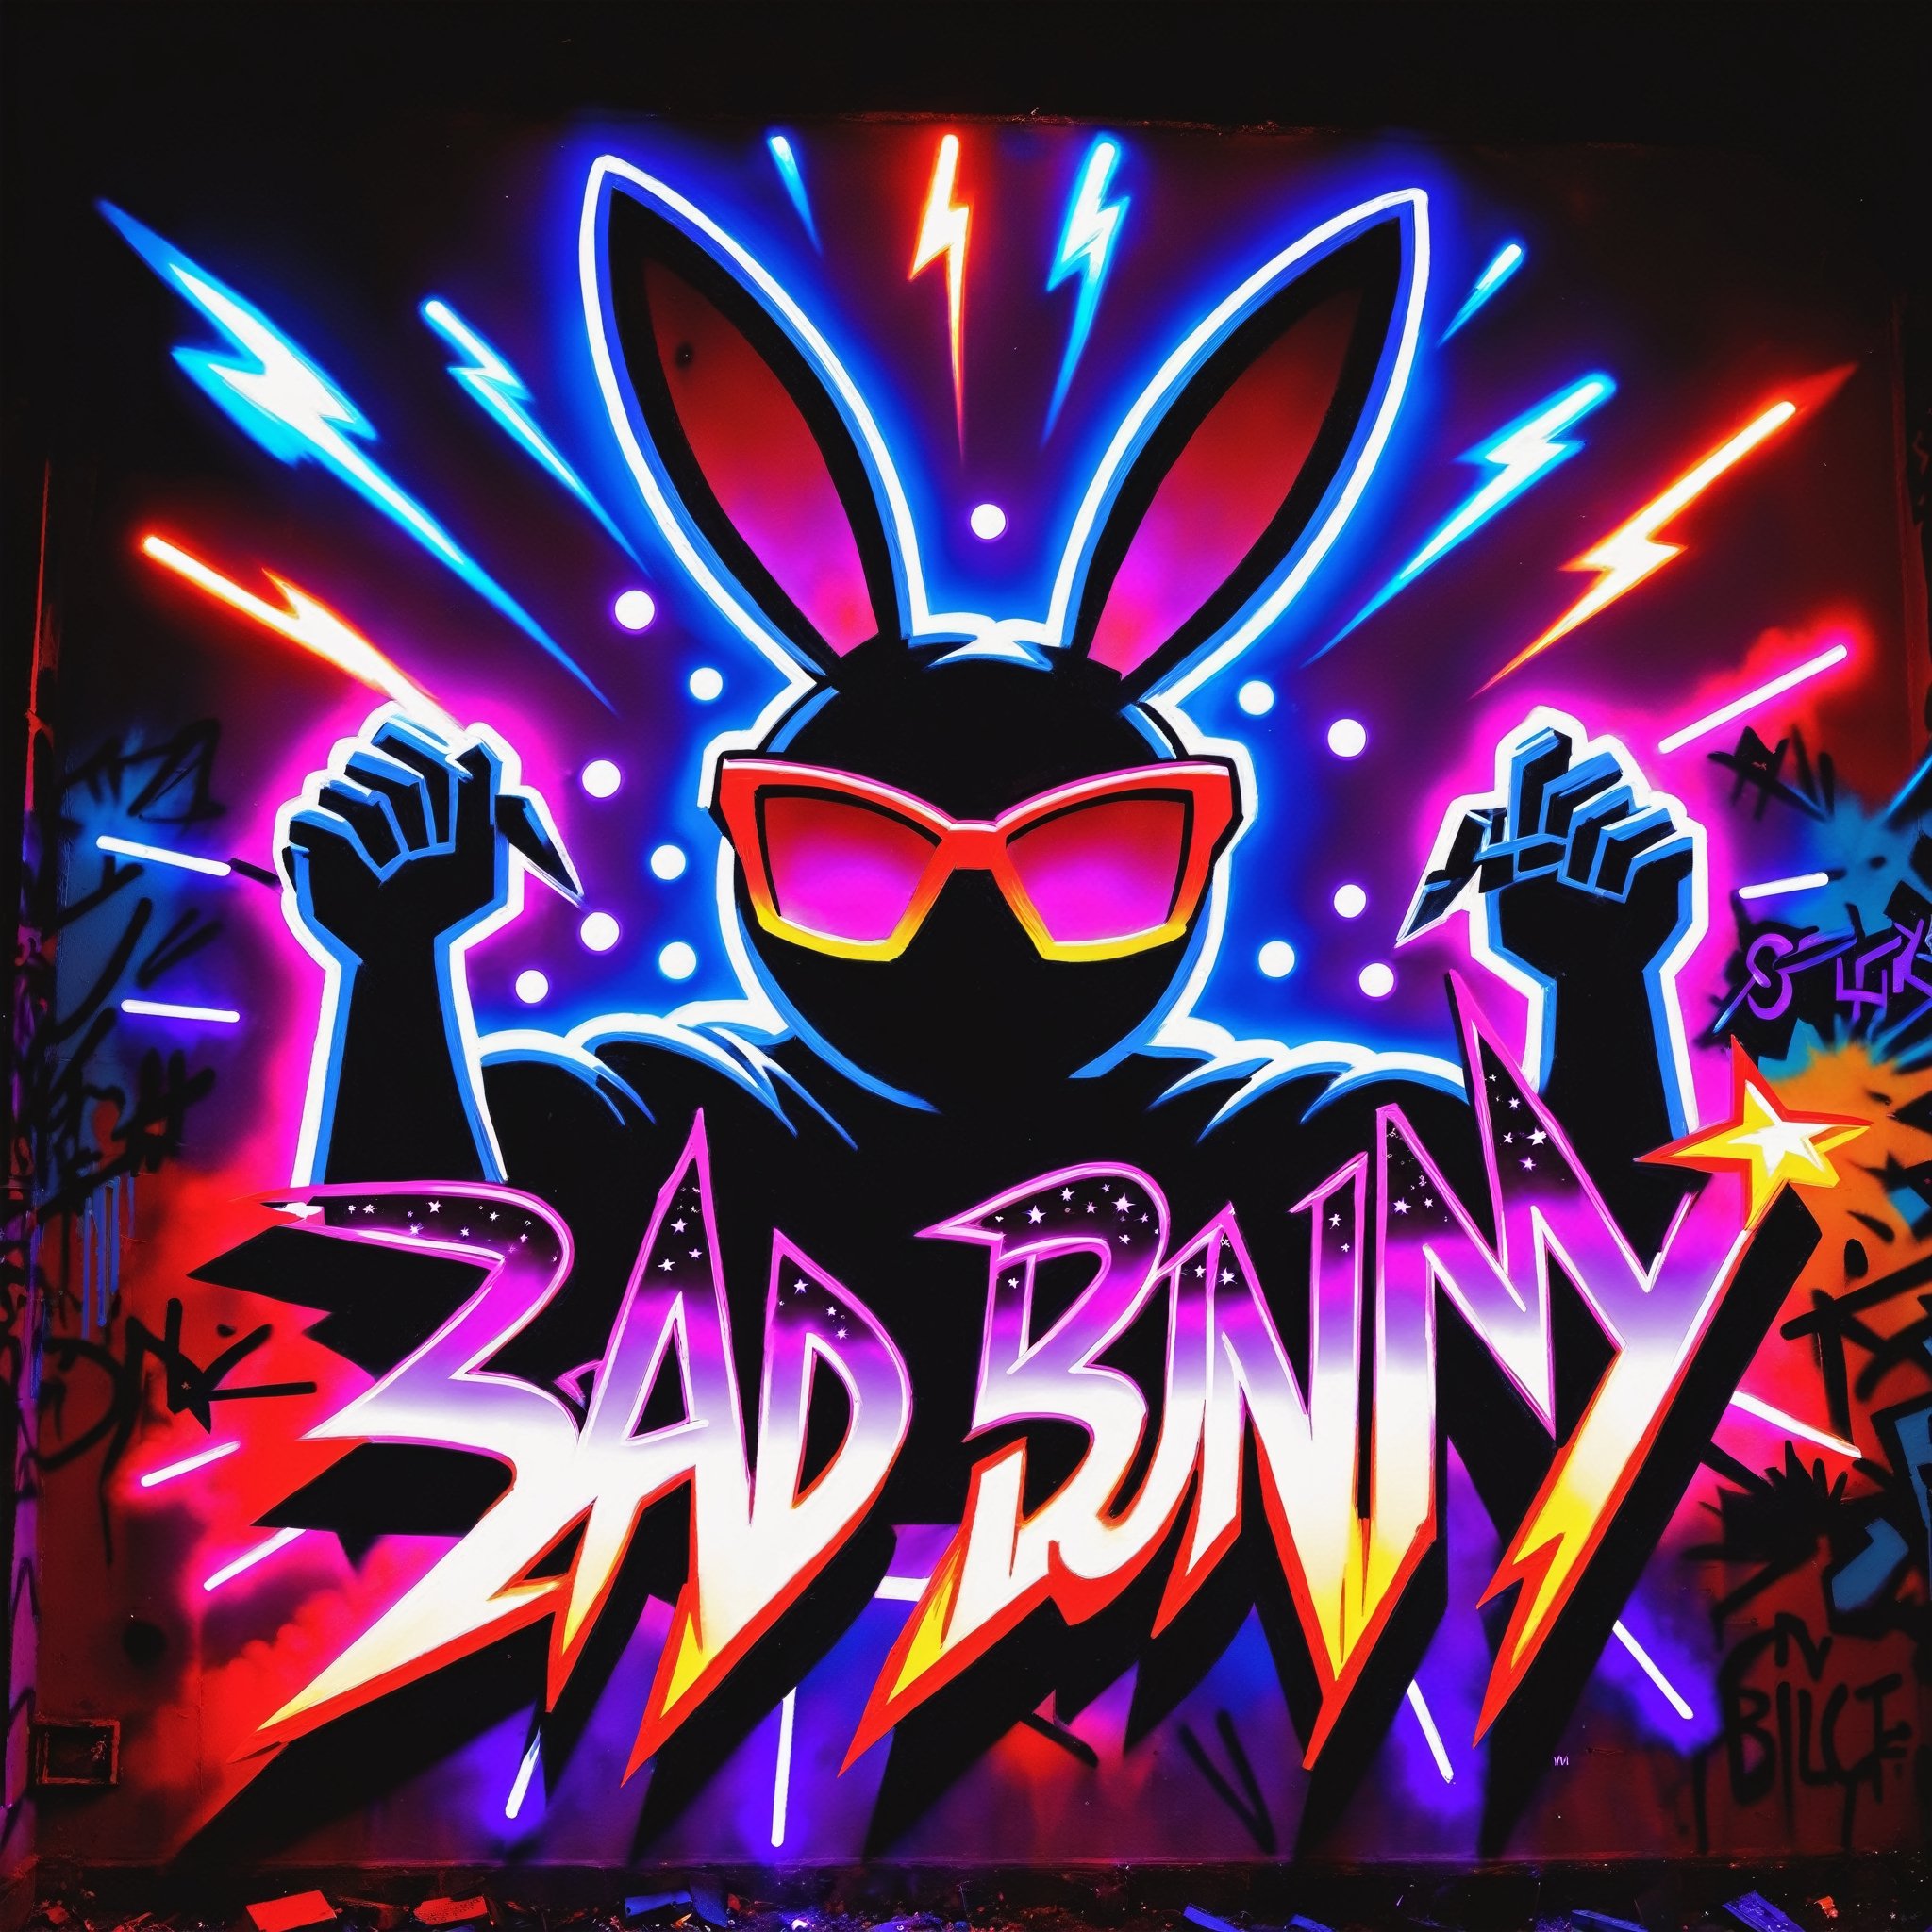 Text that reads "Bad Bunny" in neon red, black, metallic, purple, blue, Pink, neon, sparkles, Neon colored smoke, planet, graffiti background,
,composed of elements of street art Fire Lightning Electricity Space stars and neon lights atomic explosions black holes space warp, atomic explosions, Cyberpunk,DonMH010D15pl4yXL ,abyssaltech ,faize,DonM3l3m3nt4lXL